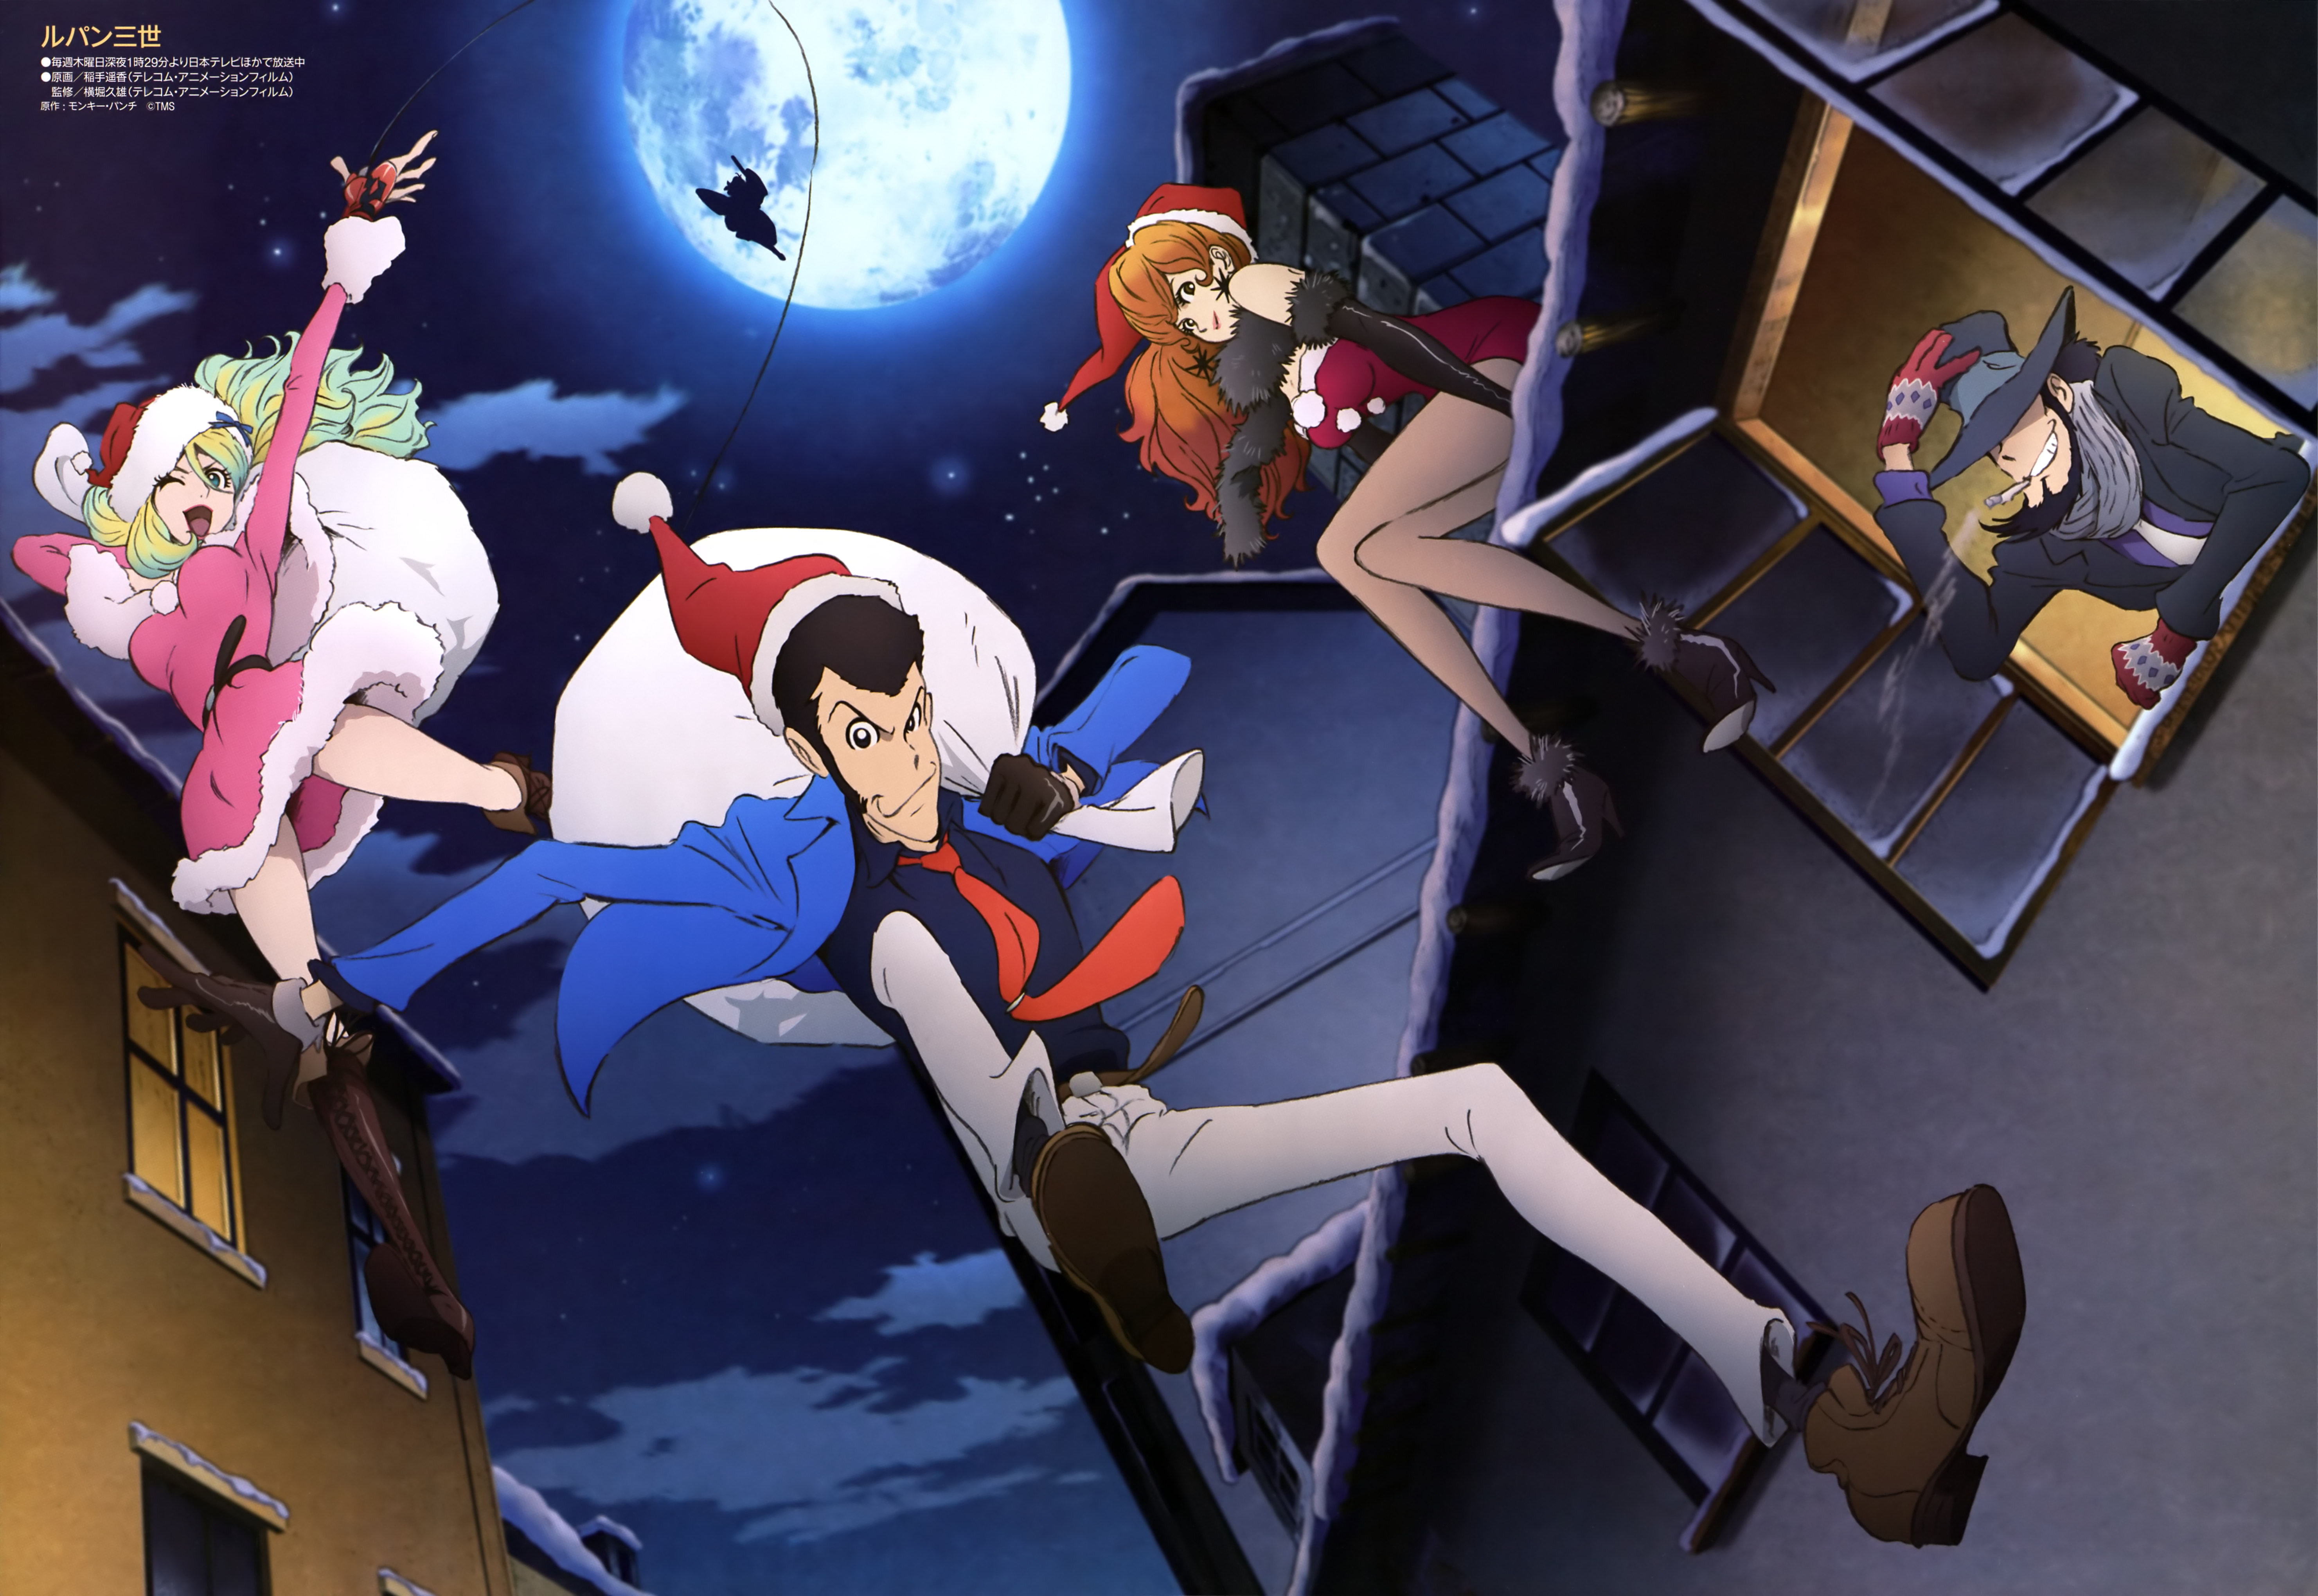 Lupin and the Gang Go Raiding for Christmas in New Visual